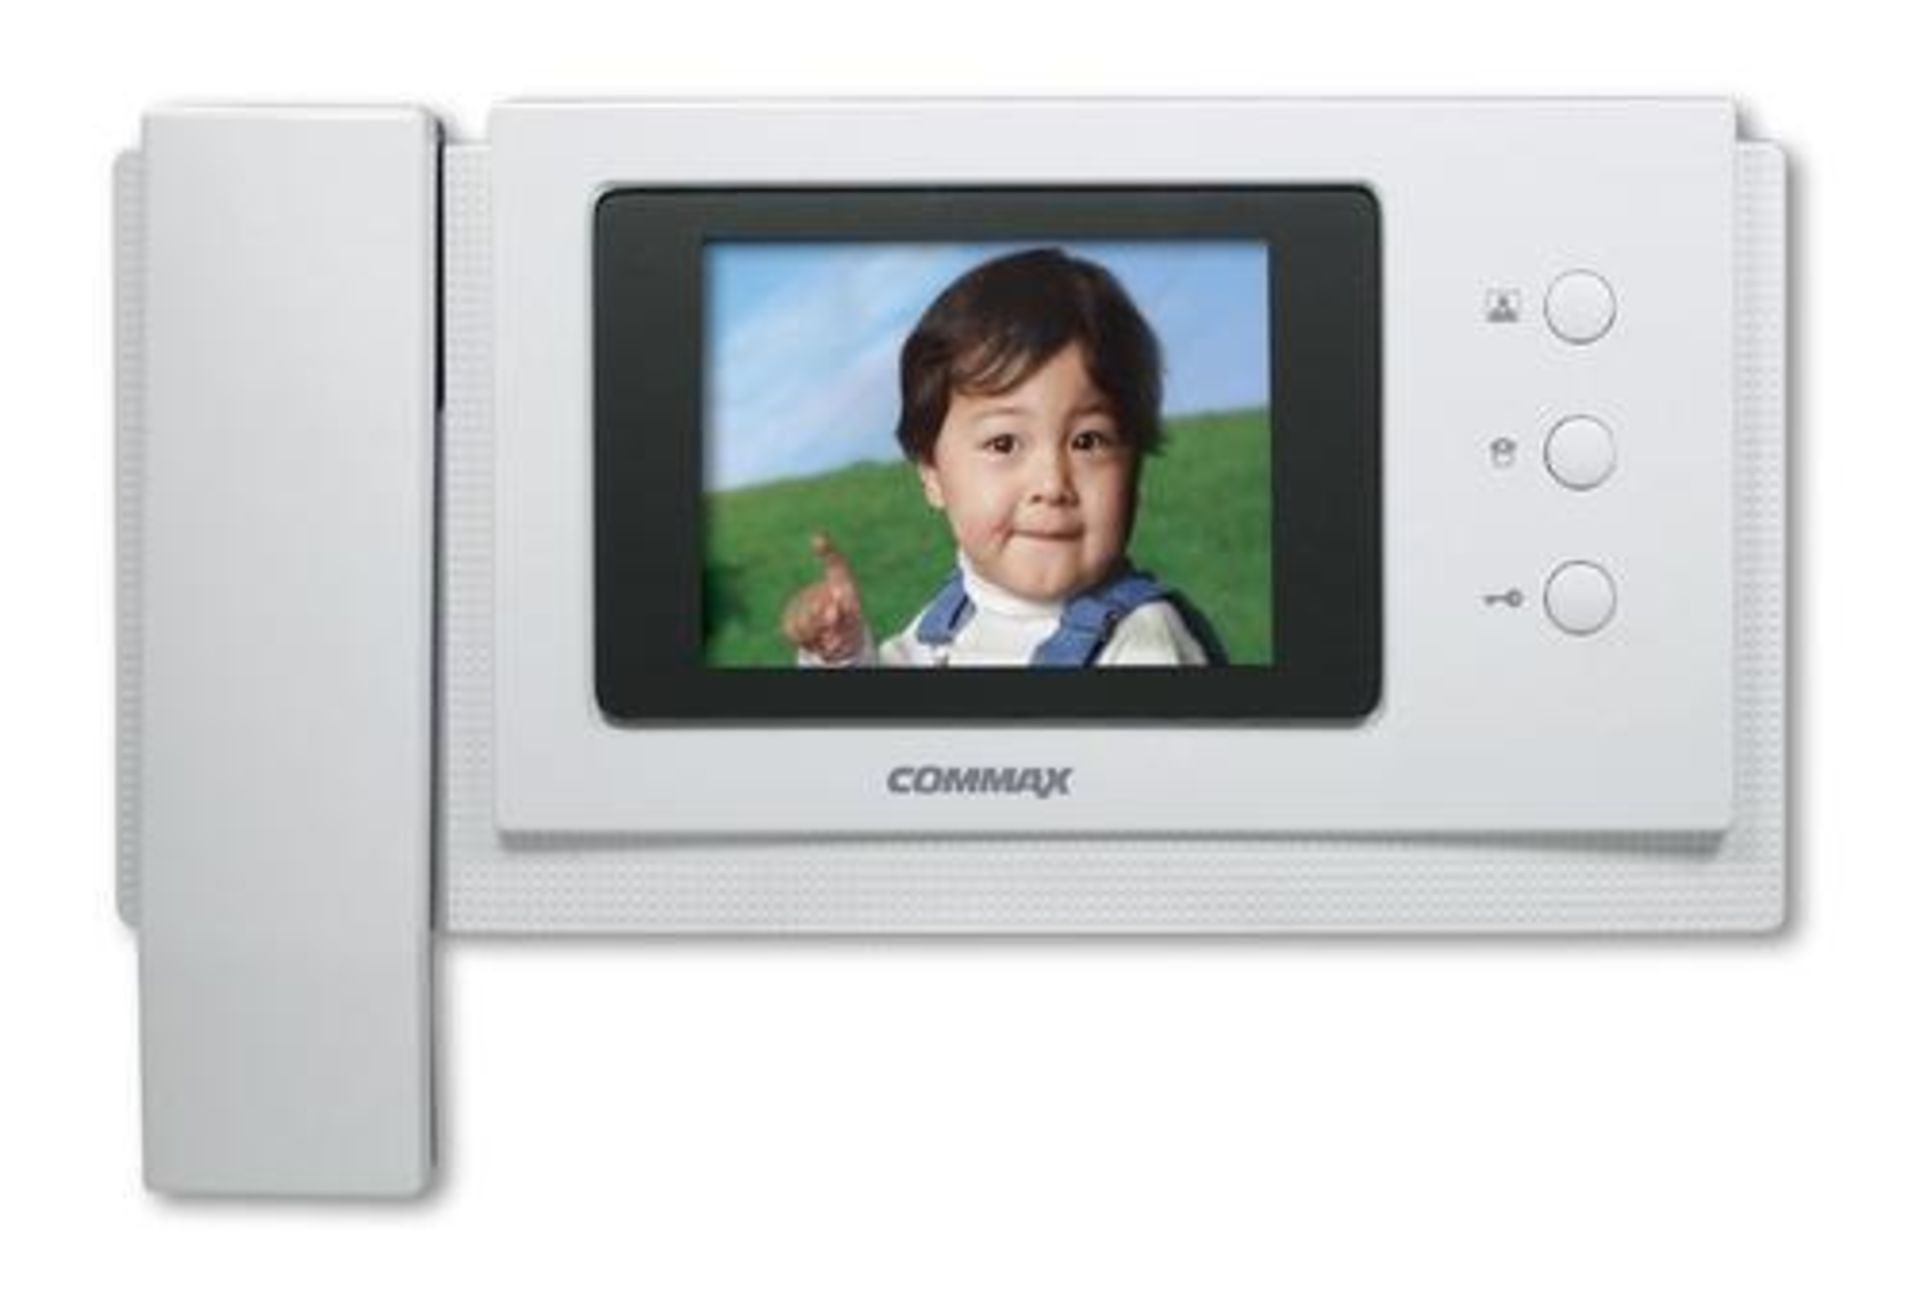 + VAT Brand New Commax SmartHome & Security Video Doorphone With 4.3 inch TFT LED Screen With